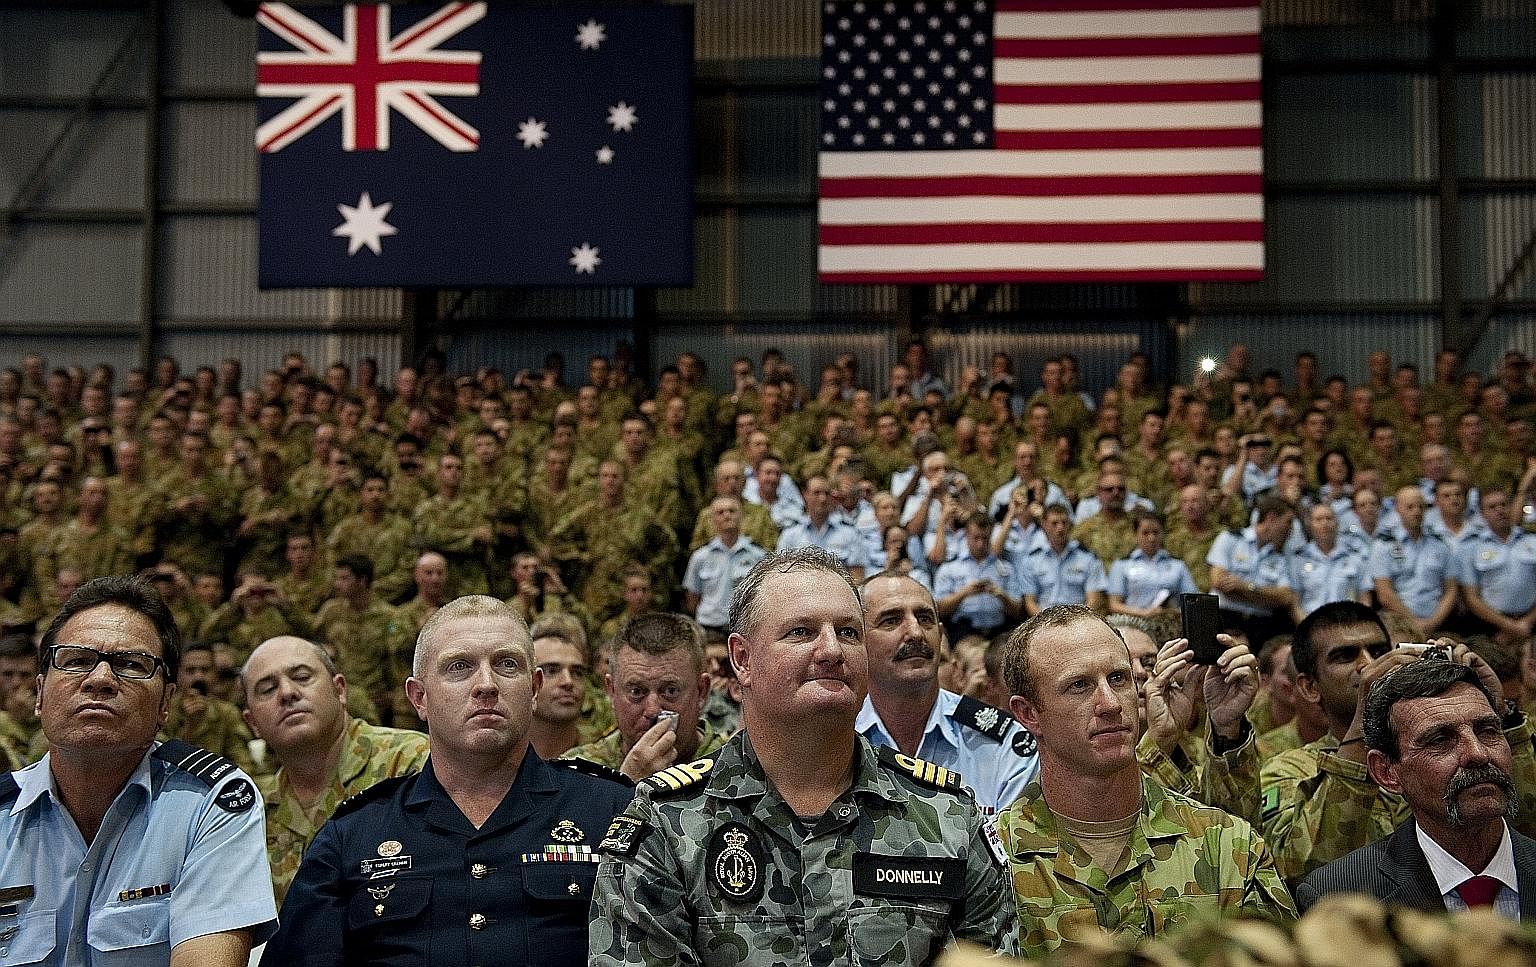 Australian troops and US Marines listening as Mr Obama gave a speech at the Royal Australian Air Force's Base Darwin in 2011. Australian troops have fought alongside the US' in each of its foreign wars.